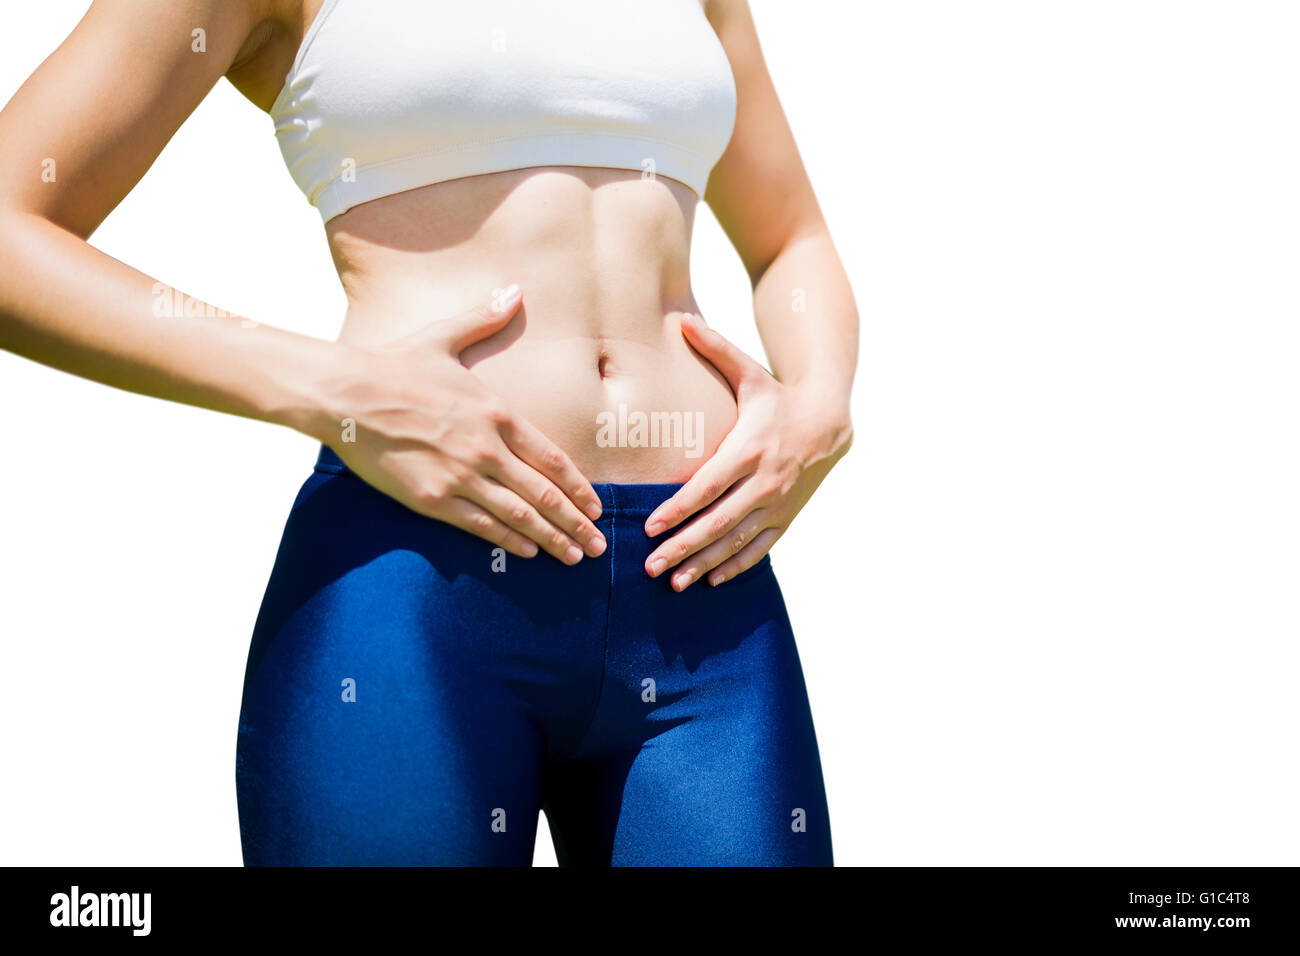 Close up of woman abdominal muscles Stock Photo